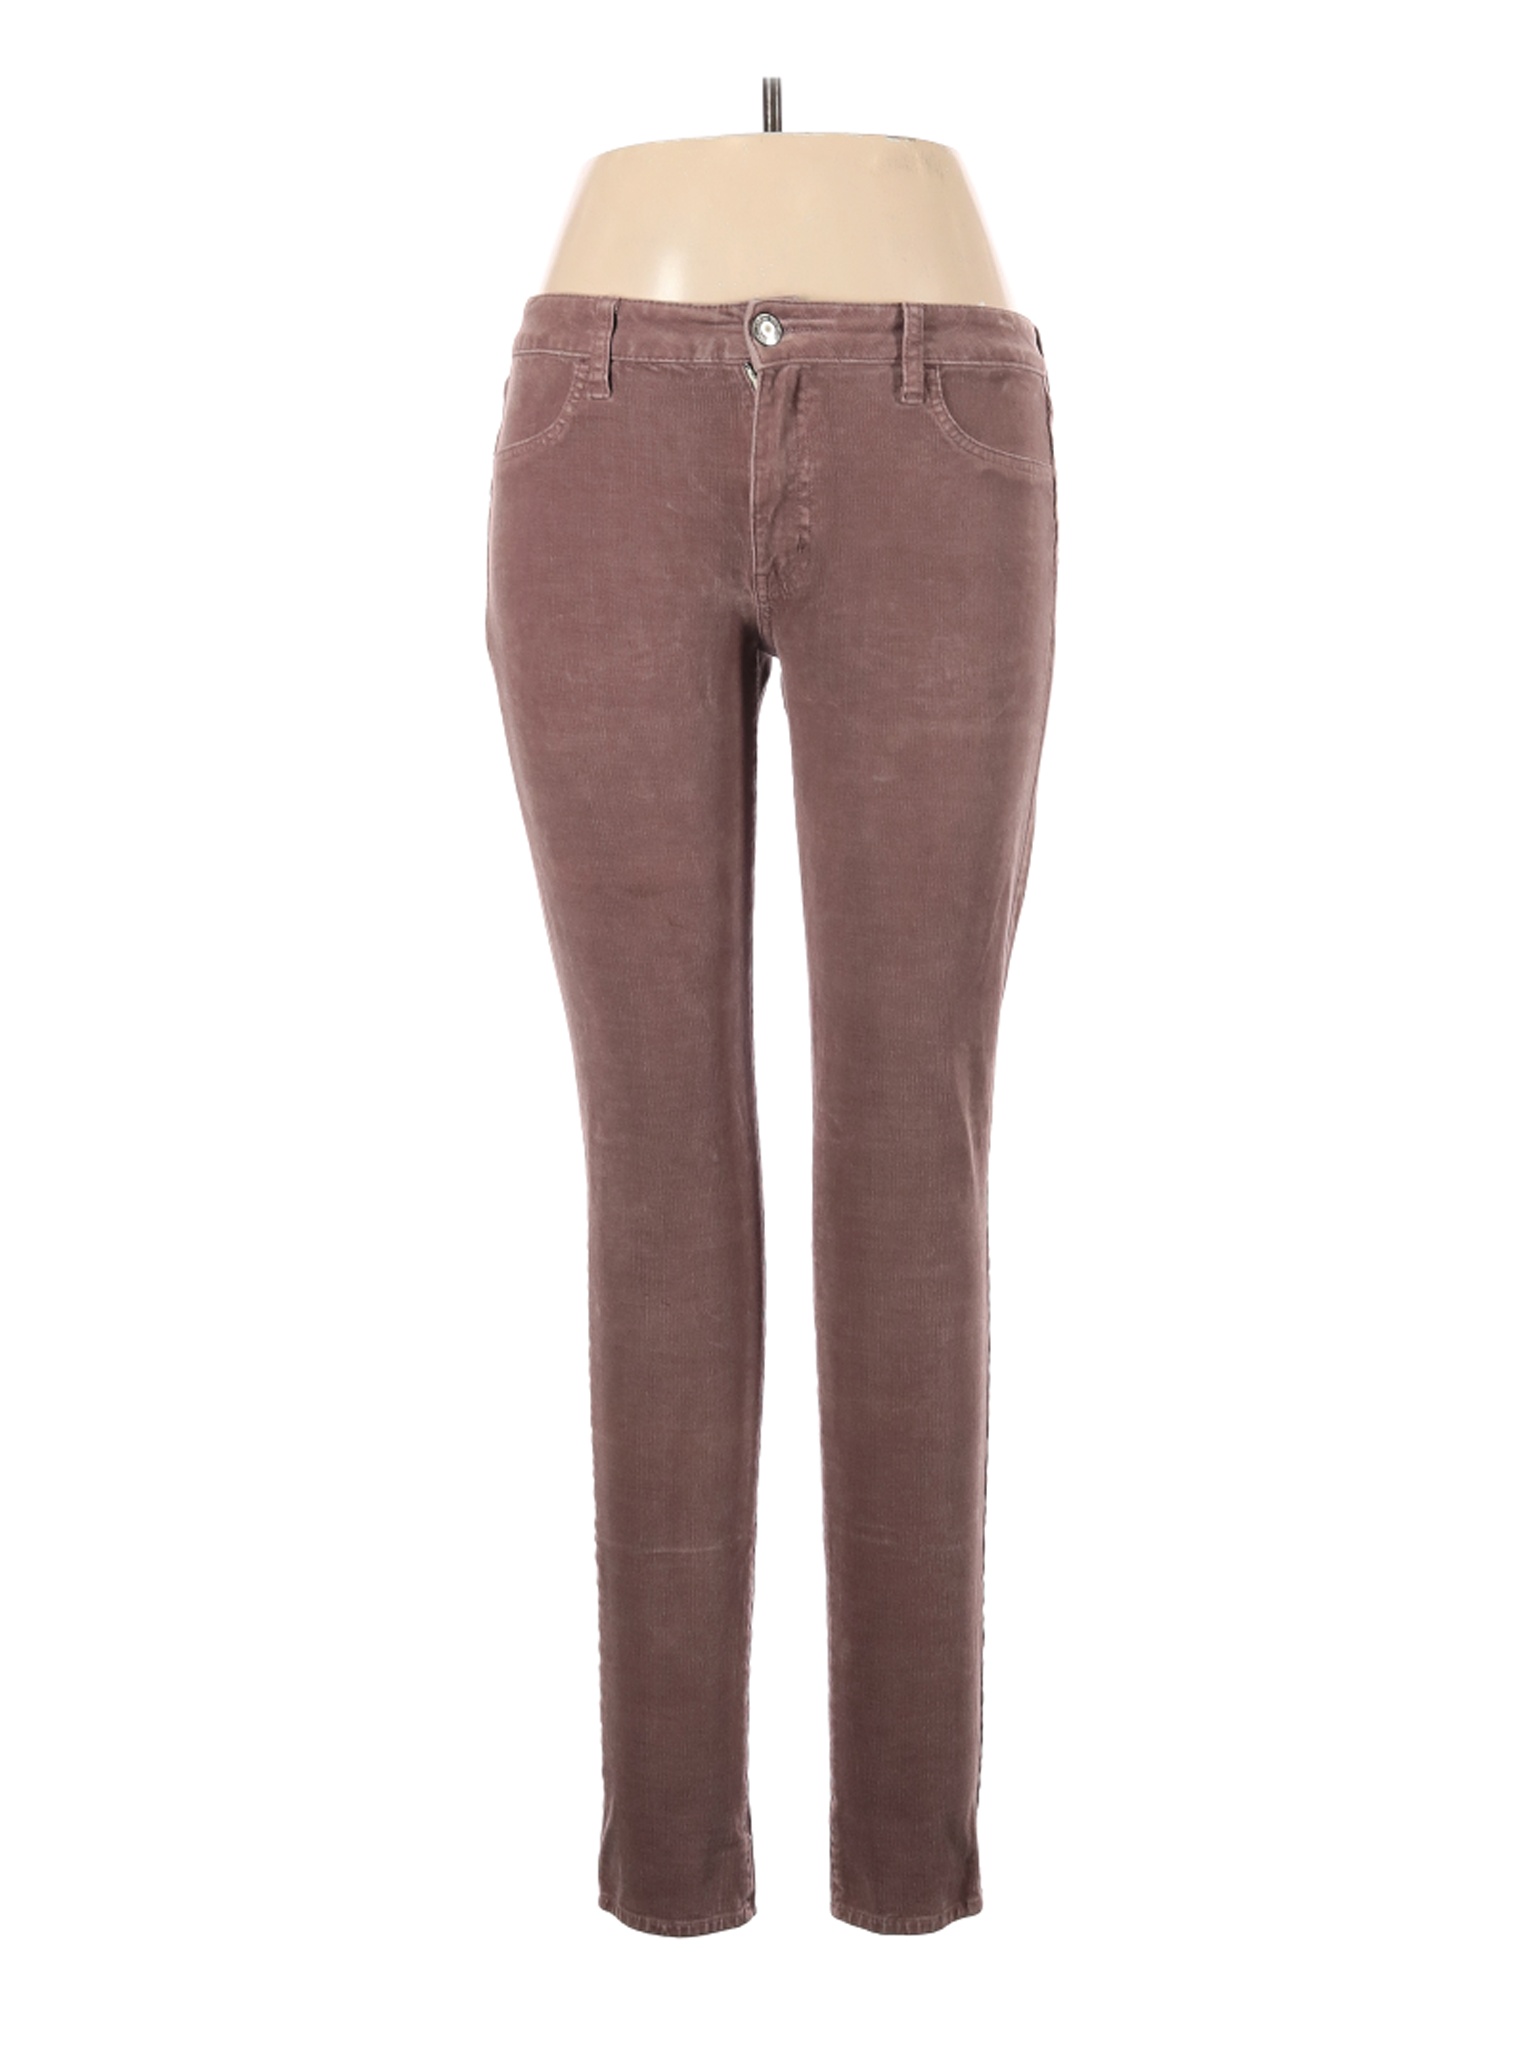 American Eagle Outfitters Women Brown Jeans 12 | eBay